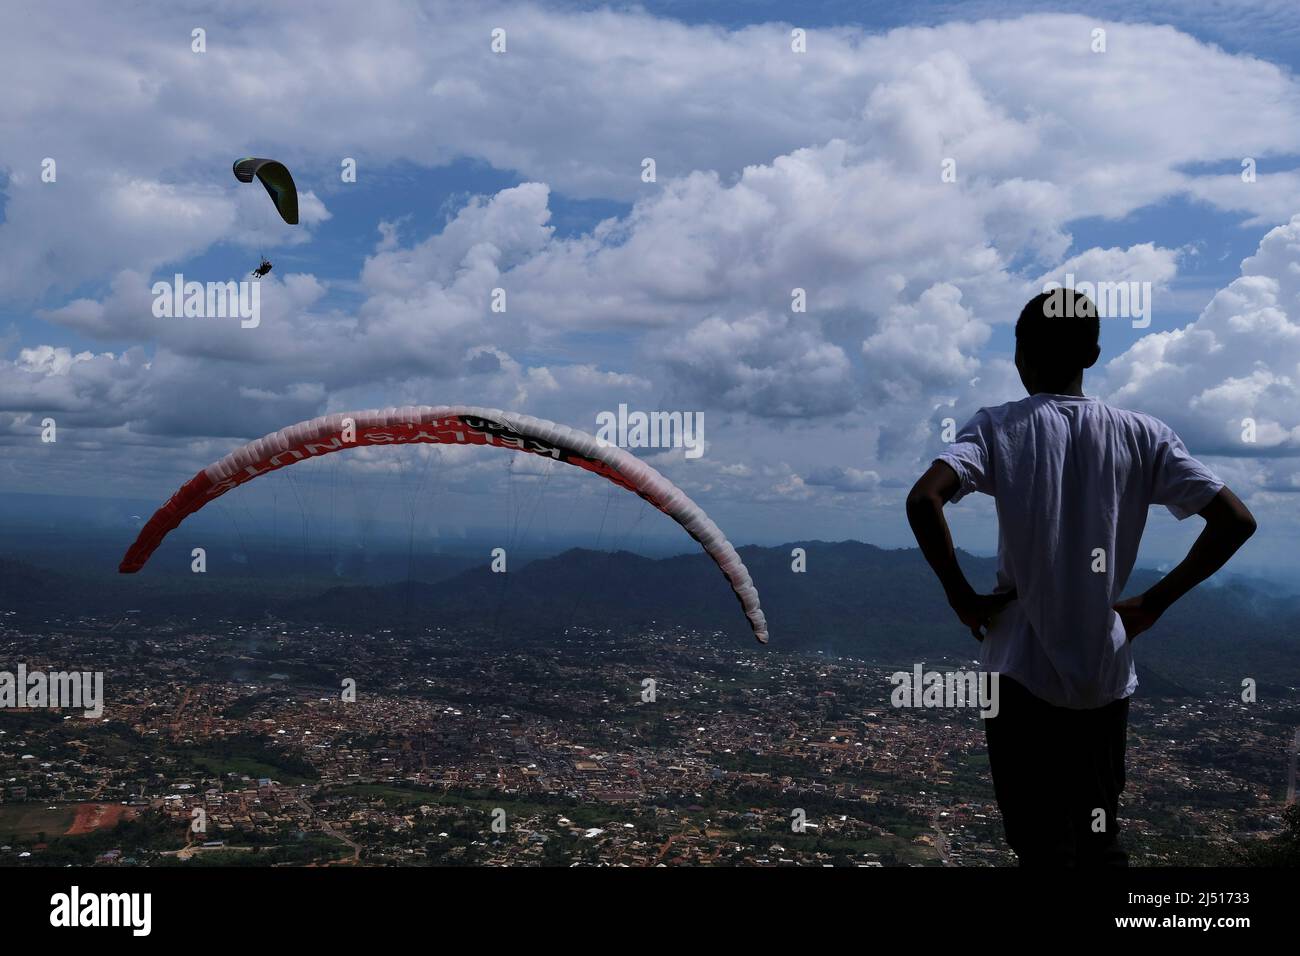 A festival assistant watches as paragliders fly with passengers during the  annual Easter paragliding festival in Kwahu-Atibie, Ghana April 15, 2022.  Picture taken April 15, 2022. REUTERS/Francis Kokoroko Stock Photo - Alamy